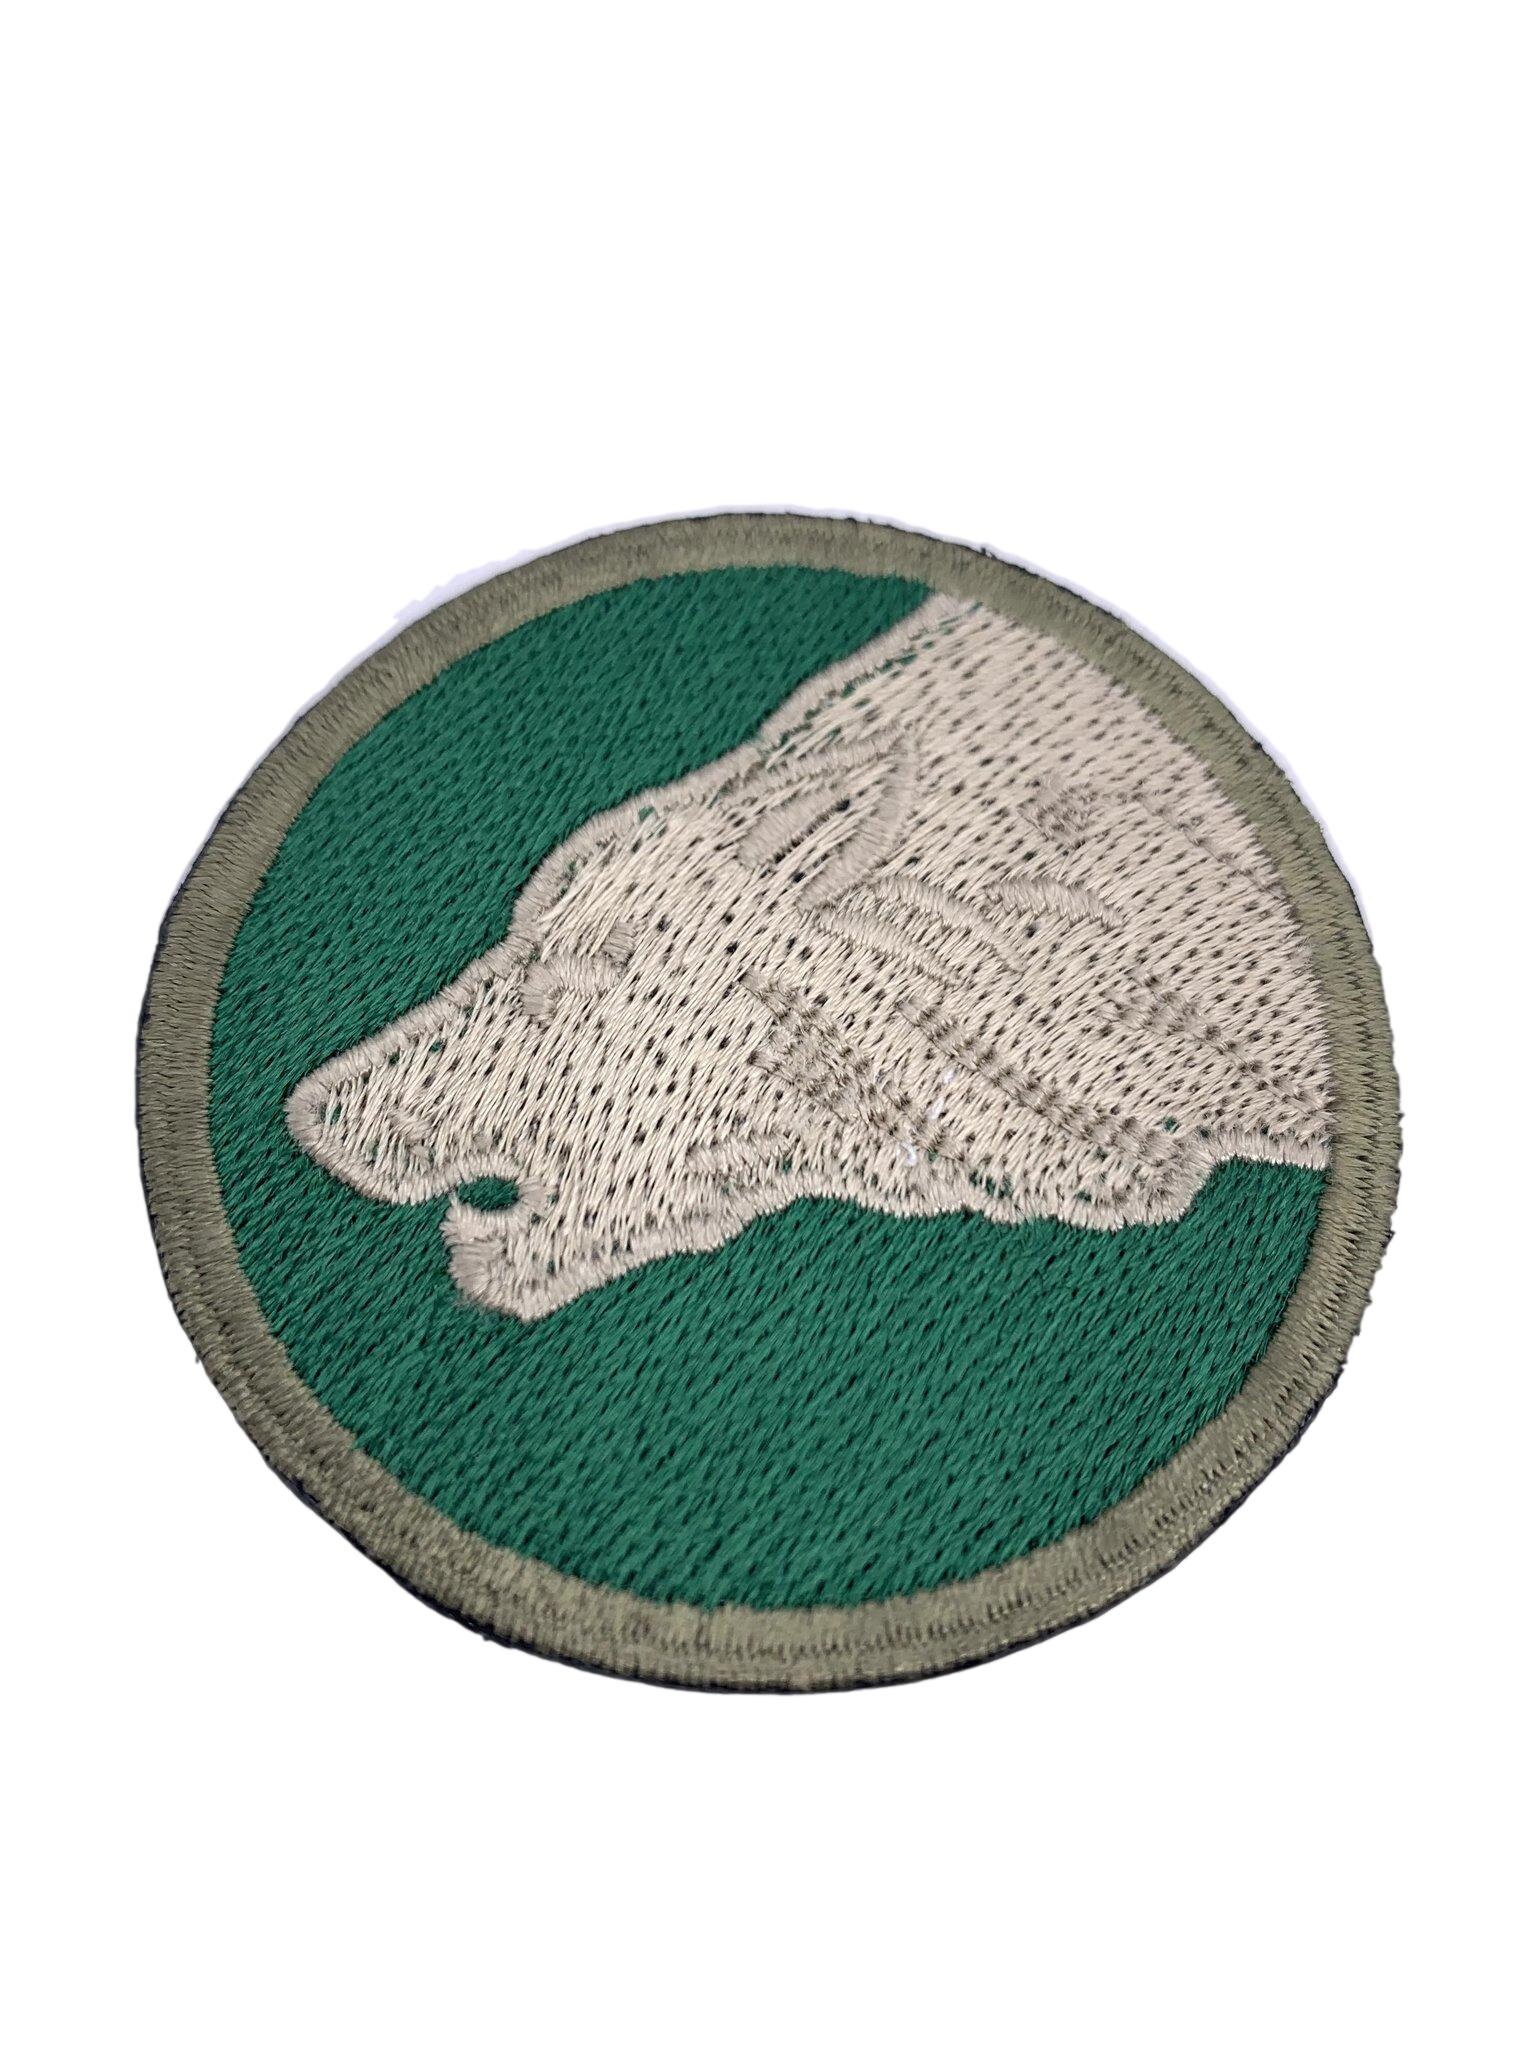 104th INFANTRY DIVISION Original patch WWII 